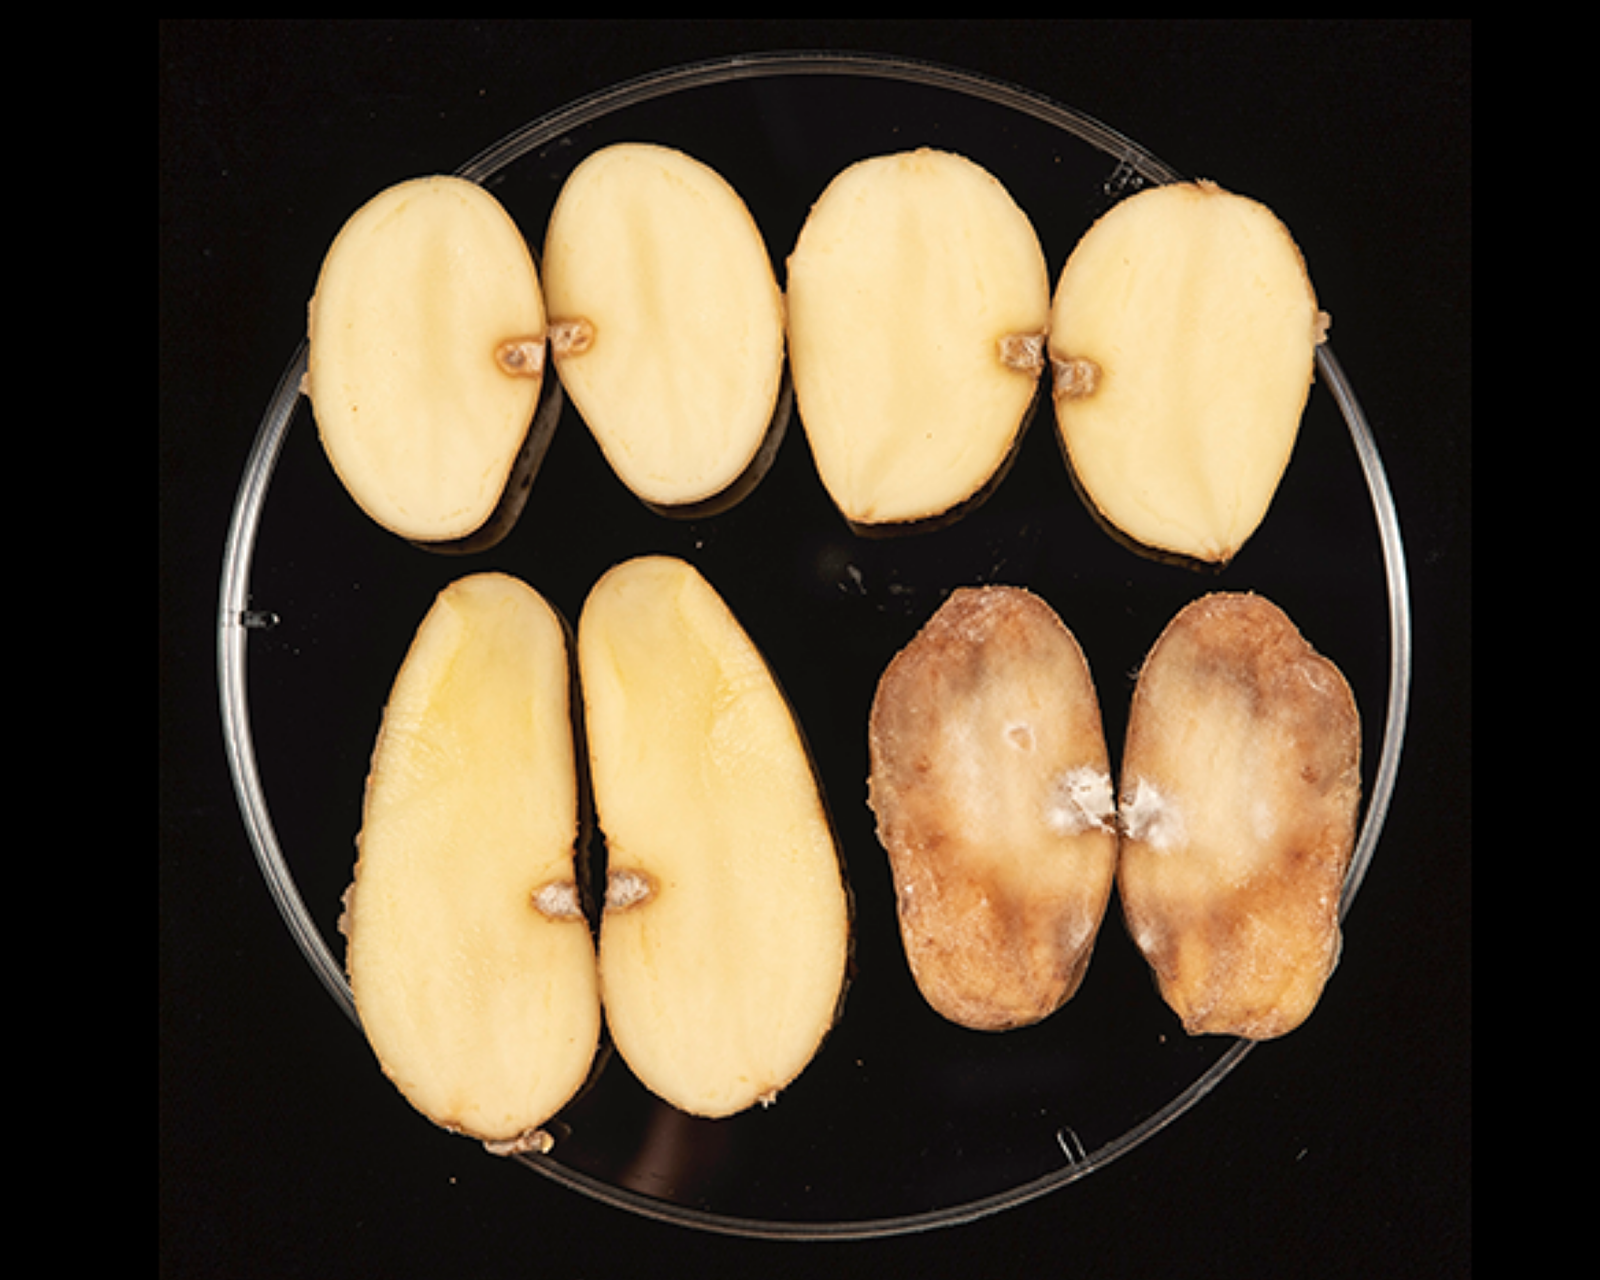 Image showing a group of potato tubers cut in half, the GM varieties show no signs of blight but the non-GM variety is brown due to blight infection.